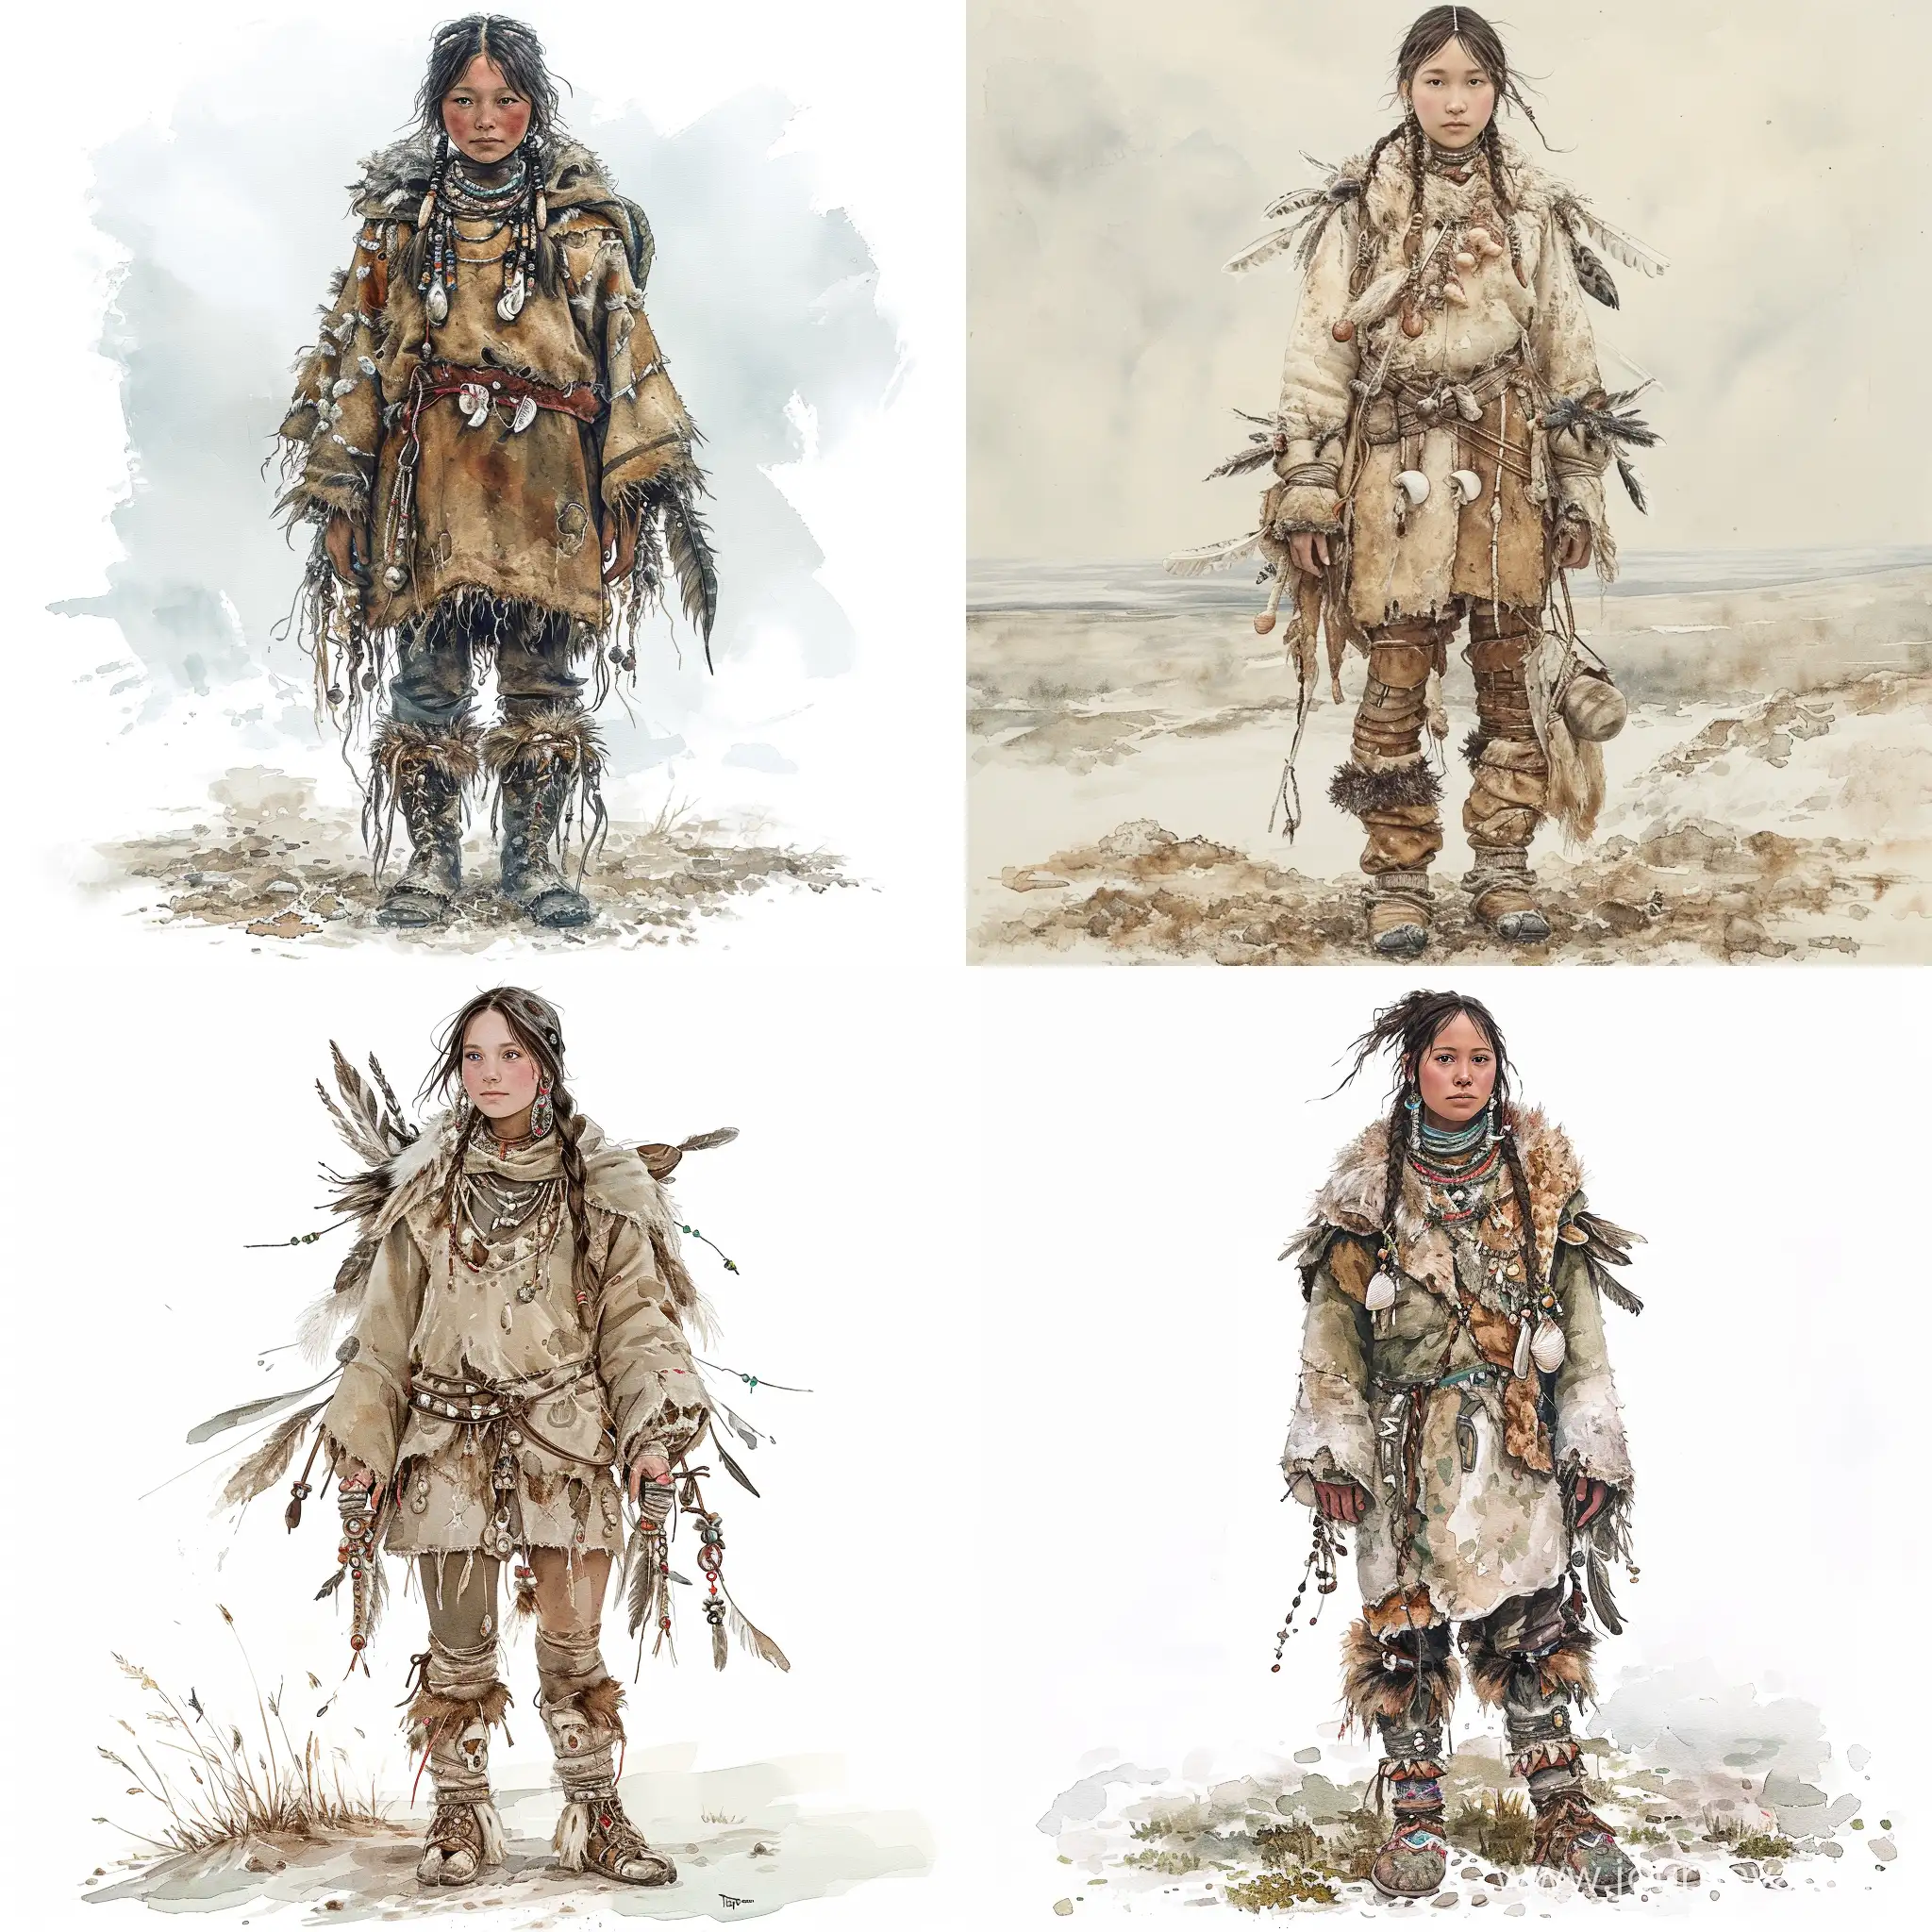 Inuit-Woman-in-Stone-Age-Clothing-on-Tundra-Landscape